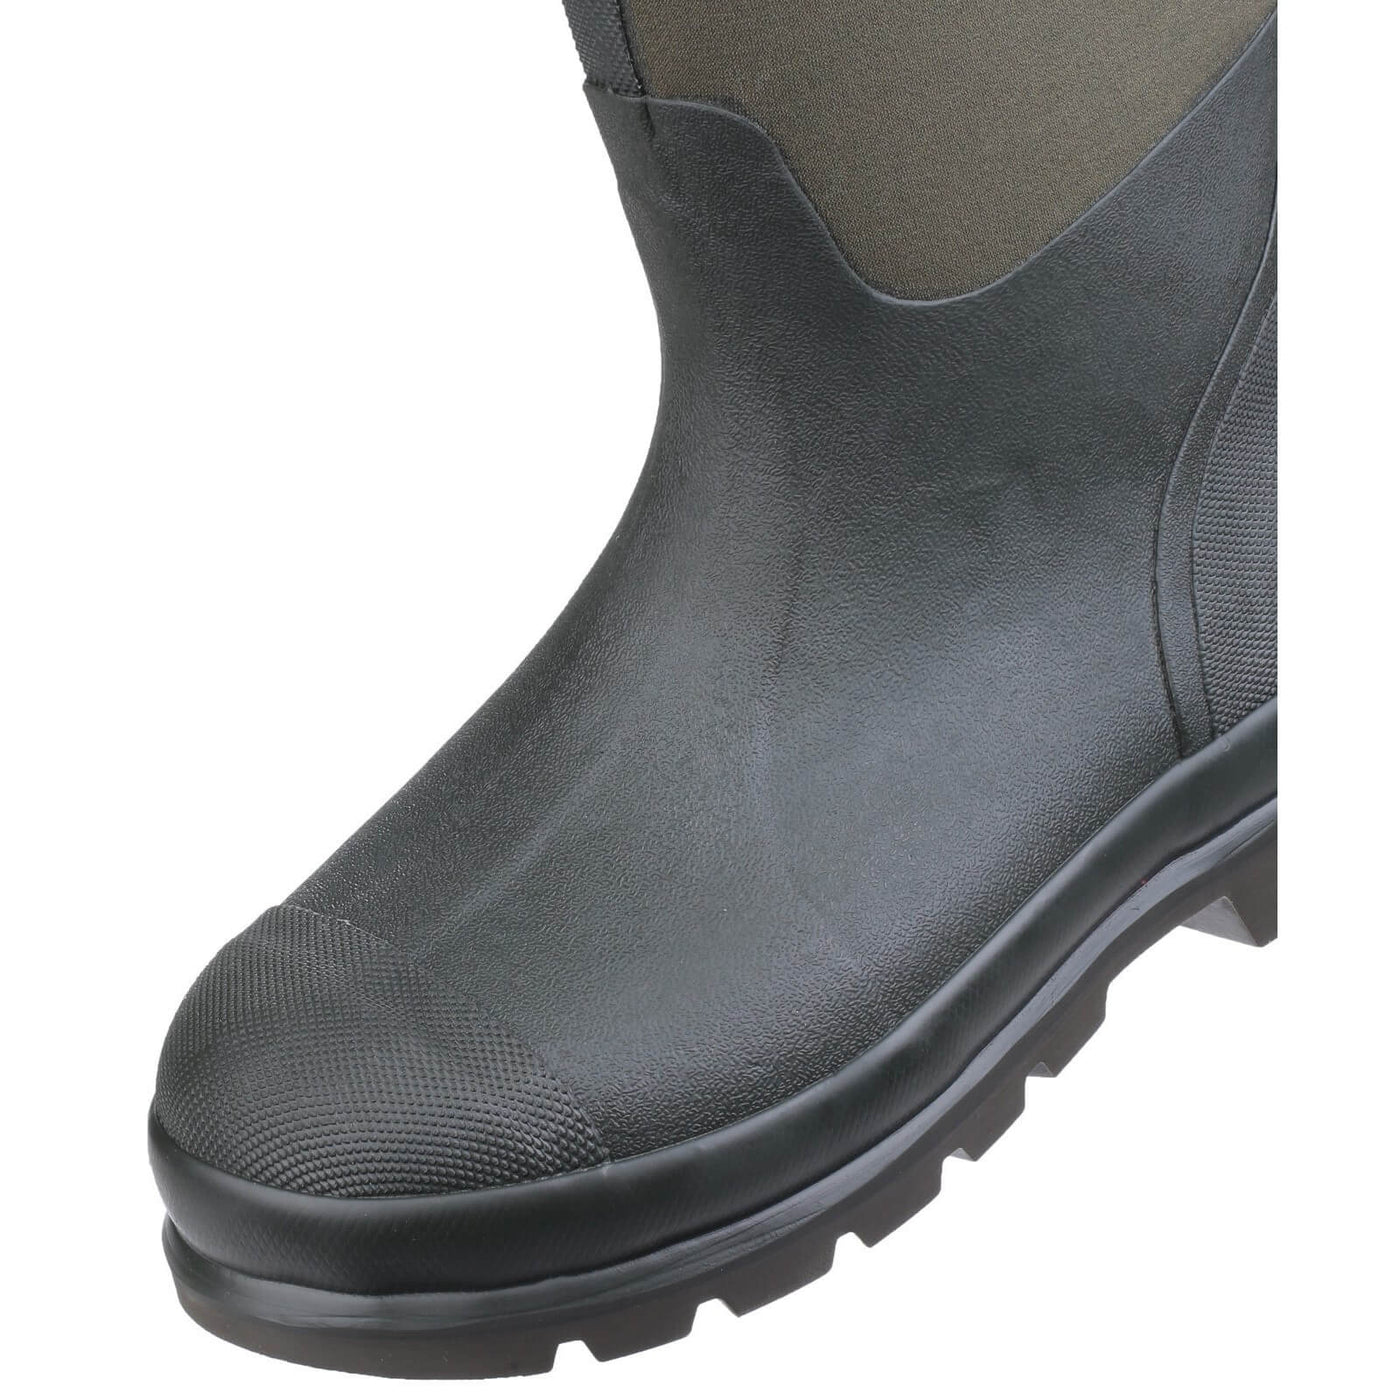 Muck Boots Chore Classic Hi Patterned Wellies Moss 8#colour_moss